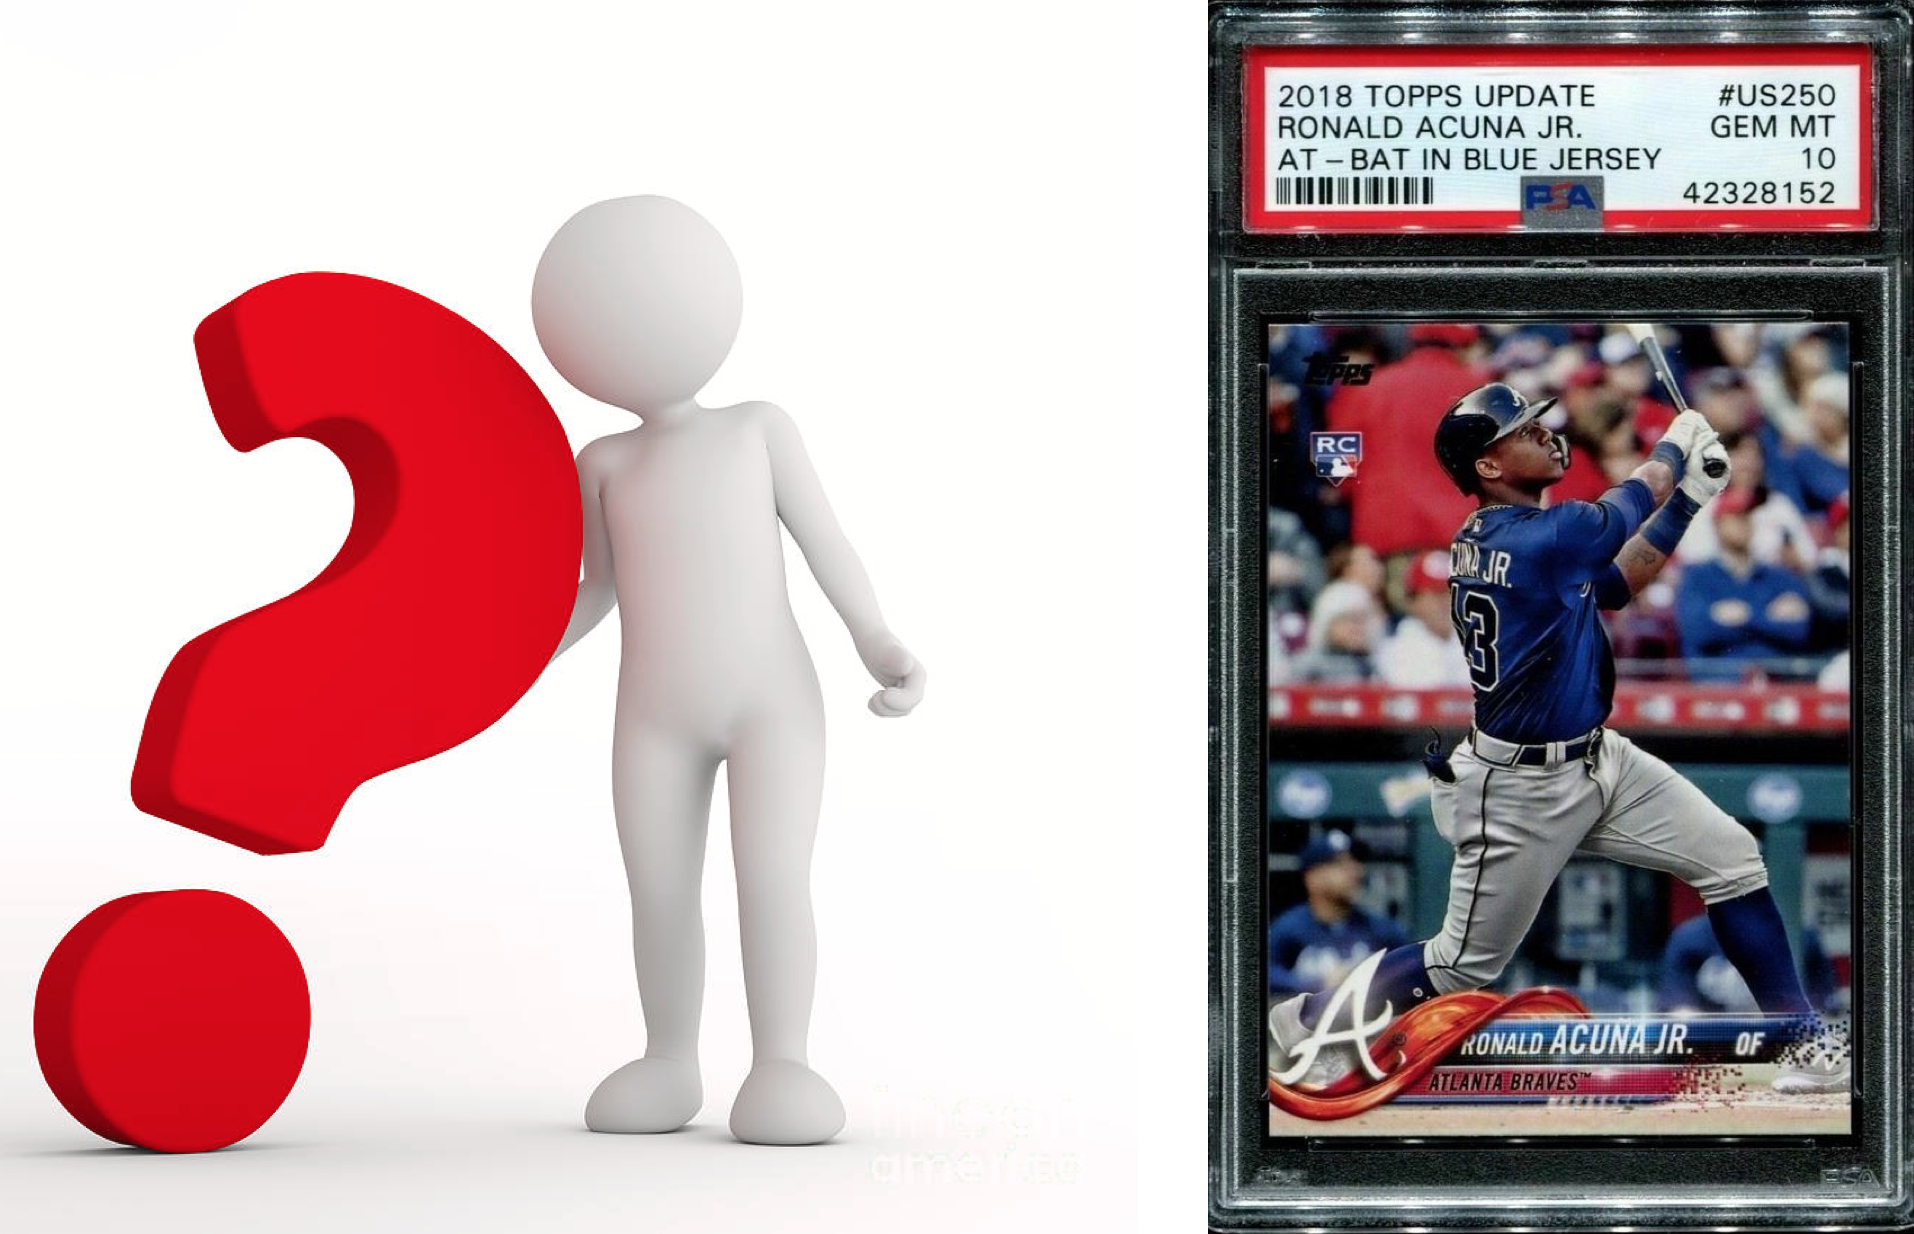 Image of man holding question mark next to Ronald Acuña Jr. sports trading card